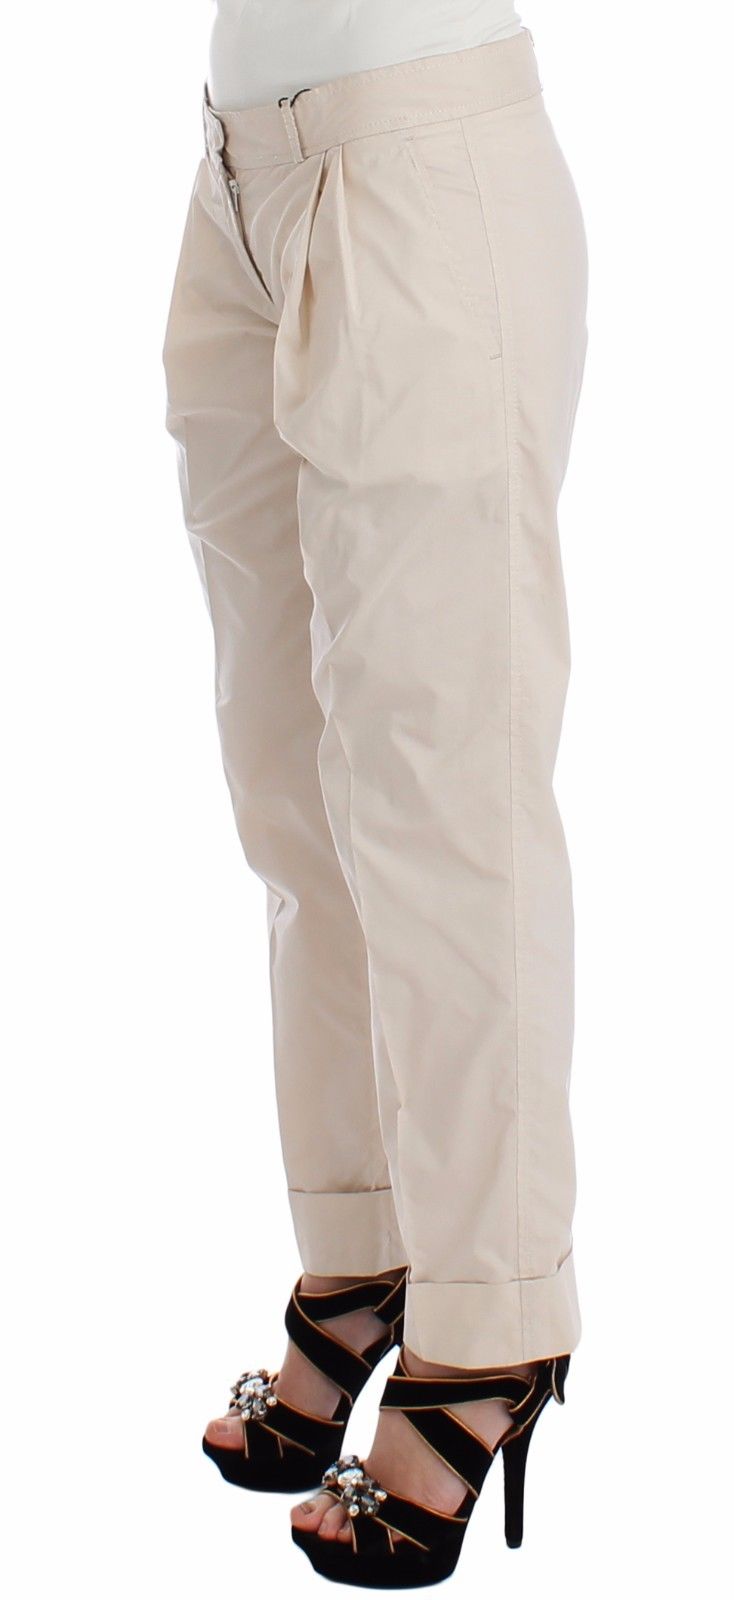 Ermanno Scervino Beige Chinos Casual Dress Pants Khakis